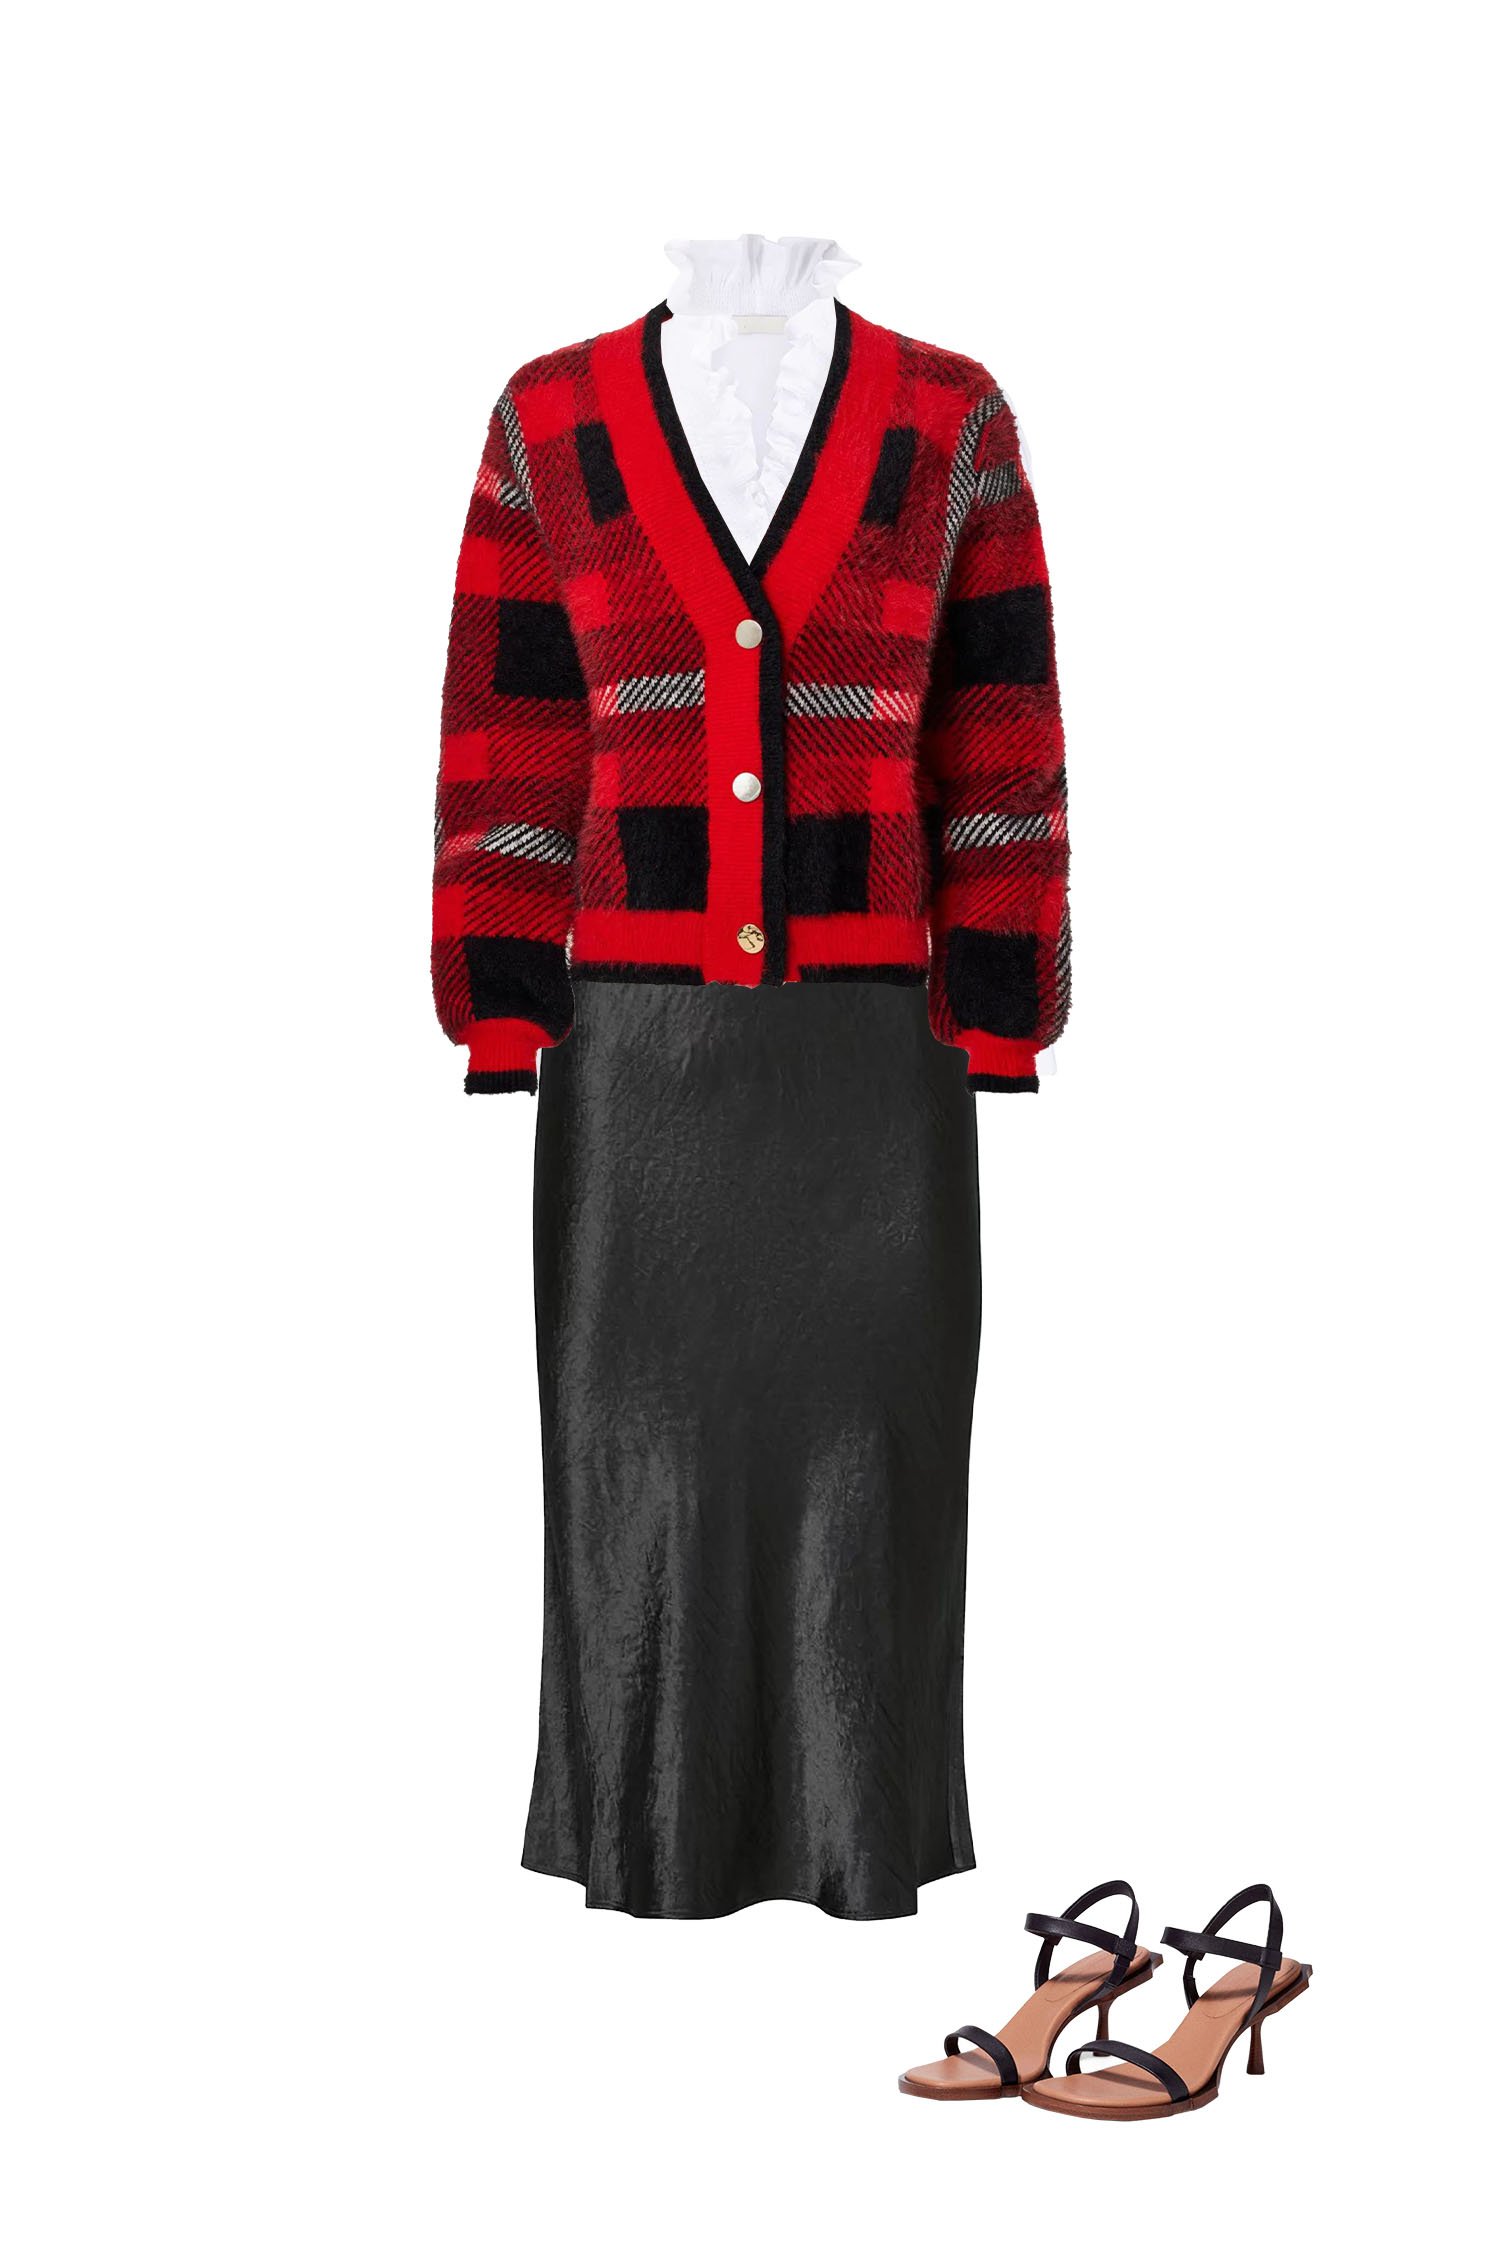 Black Satin Skirt Outfit with White Ruffle Neck Blouse, Black and Red Plaid Cardigan, and Black Heeled Sandals